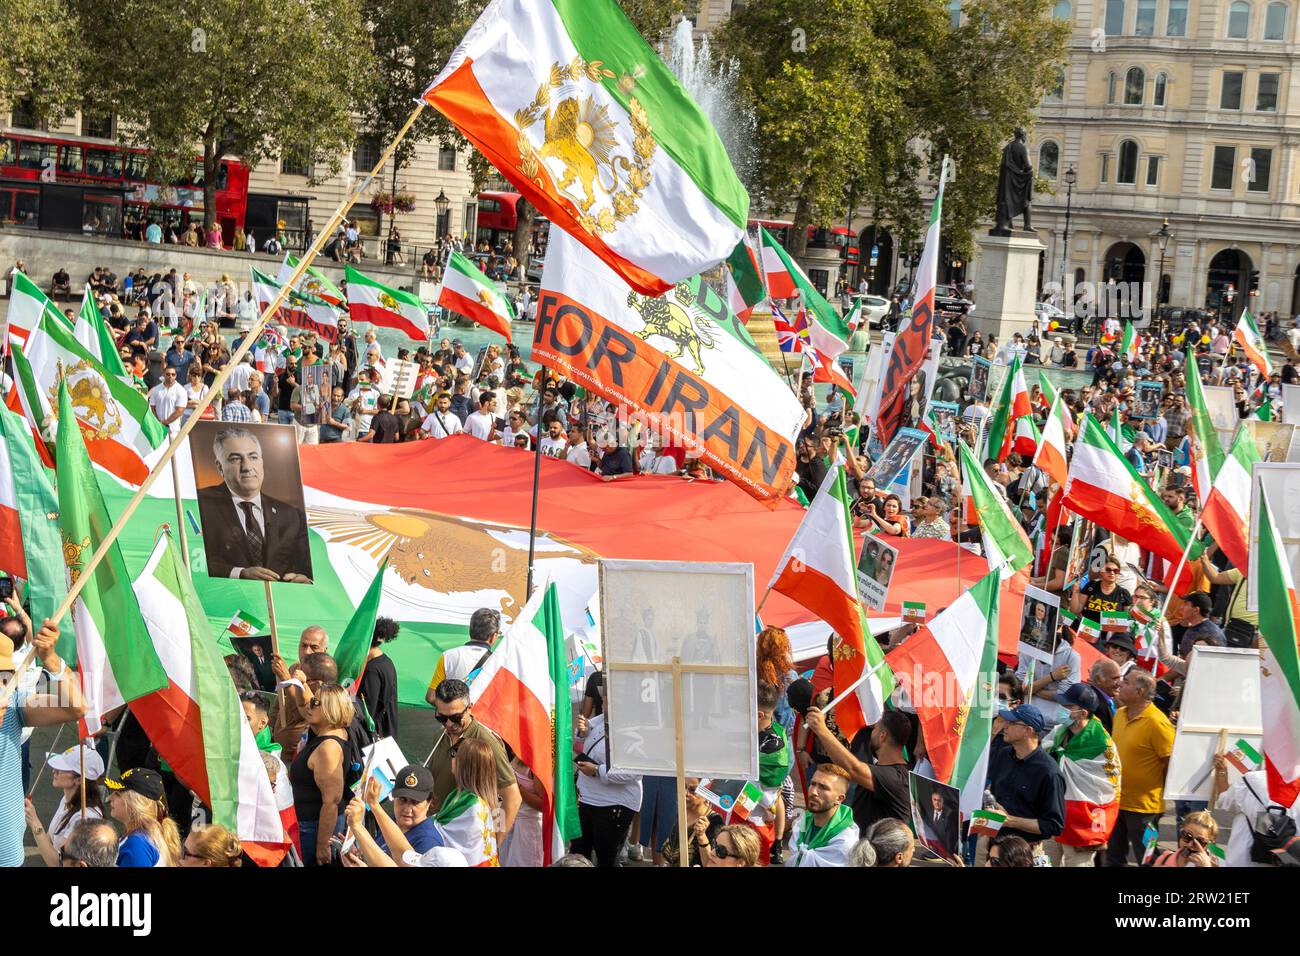 London, UK. 16th Sep, 2023. On the first anniversary of the death of Mahsa Amini, members of the British-Iranian community congregated in Central London to pay tribute. Displayed prominently were images of Mahsa alongside those of Crown Prince Reza Pahlavi and the historic Shir-o-Khorshid flag, an emblem representing Iran. The gathering marked a sombre occasion, honouring not only Mahsa but the broader Iranian diaspora's quest for justice and freedom. Credit: Sinai Noor/Alamy Live News Stock Photo